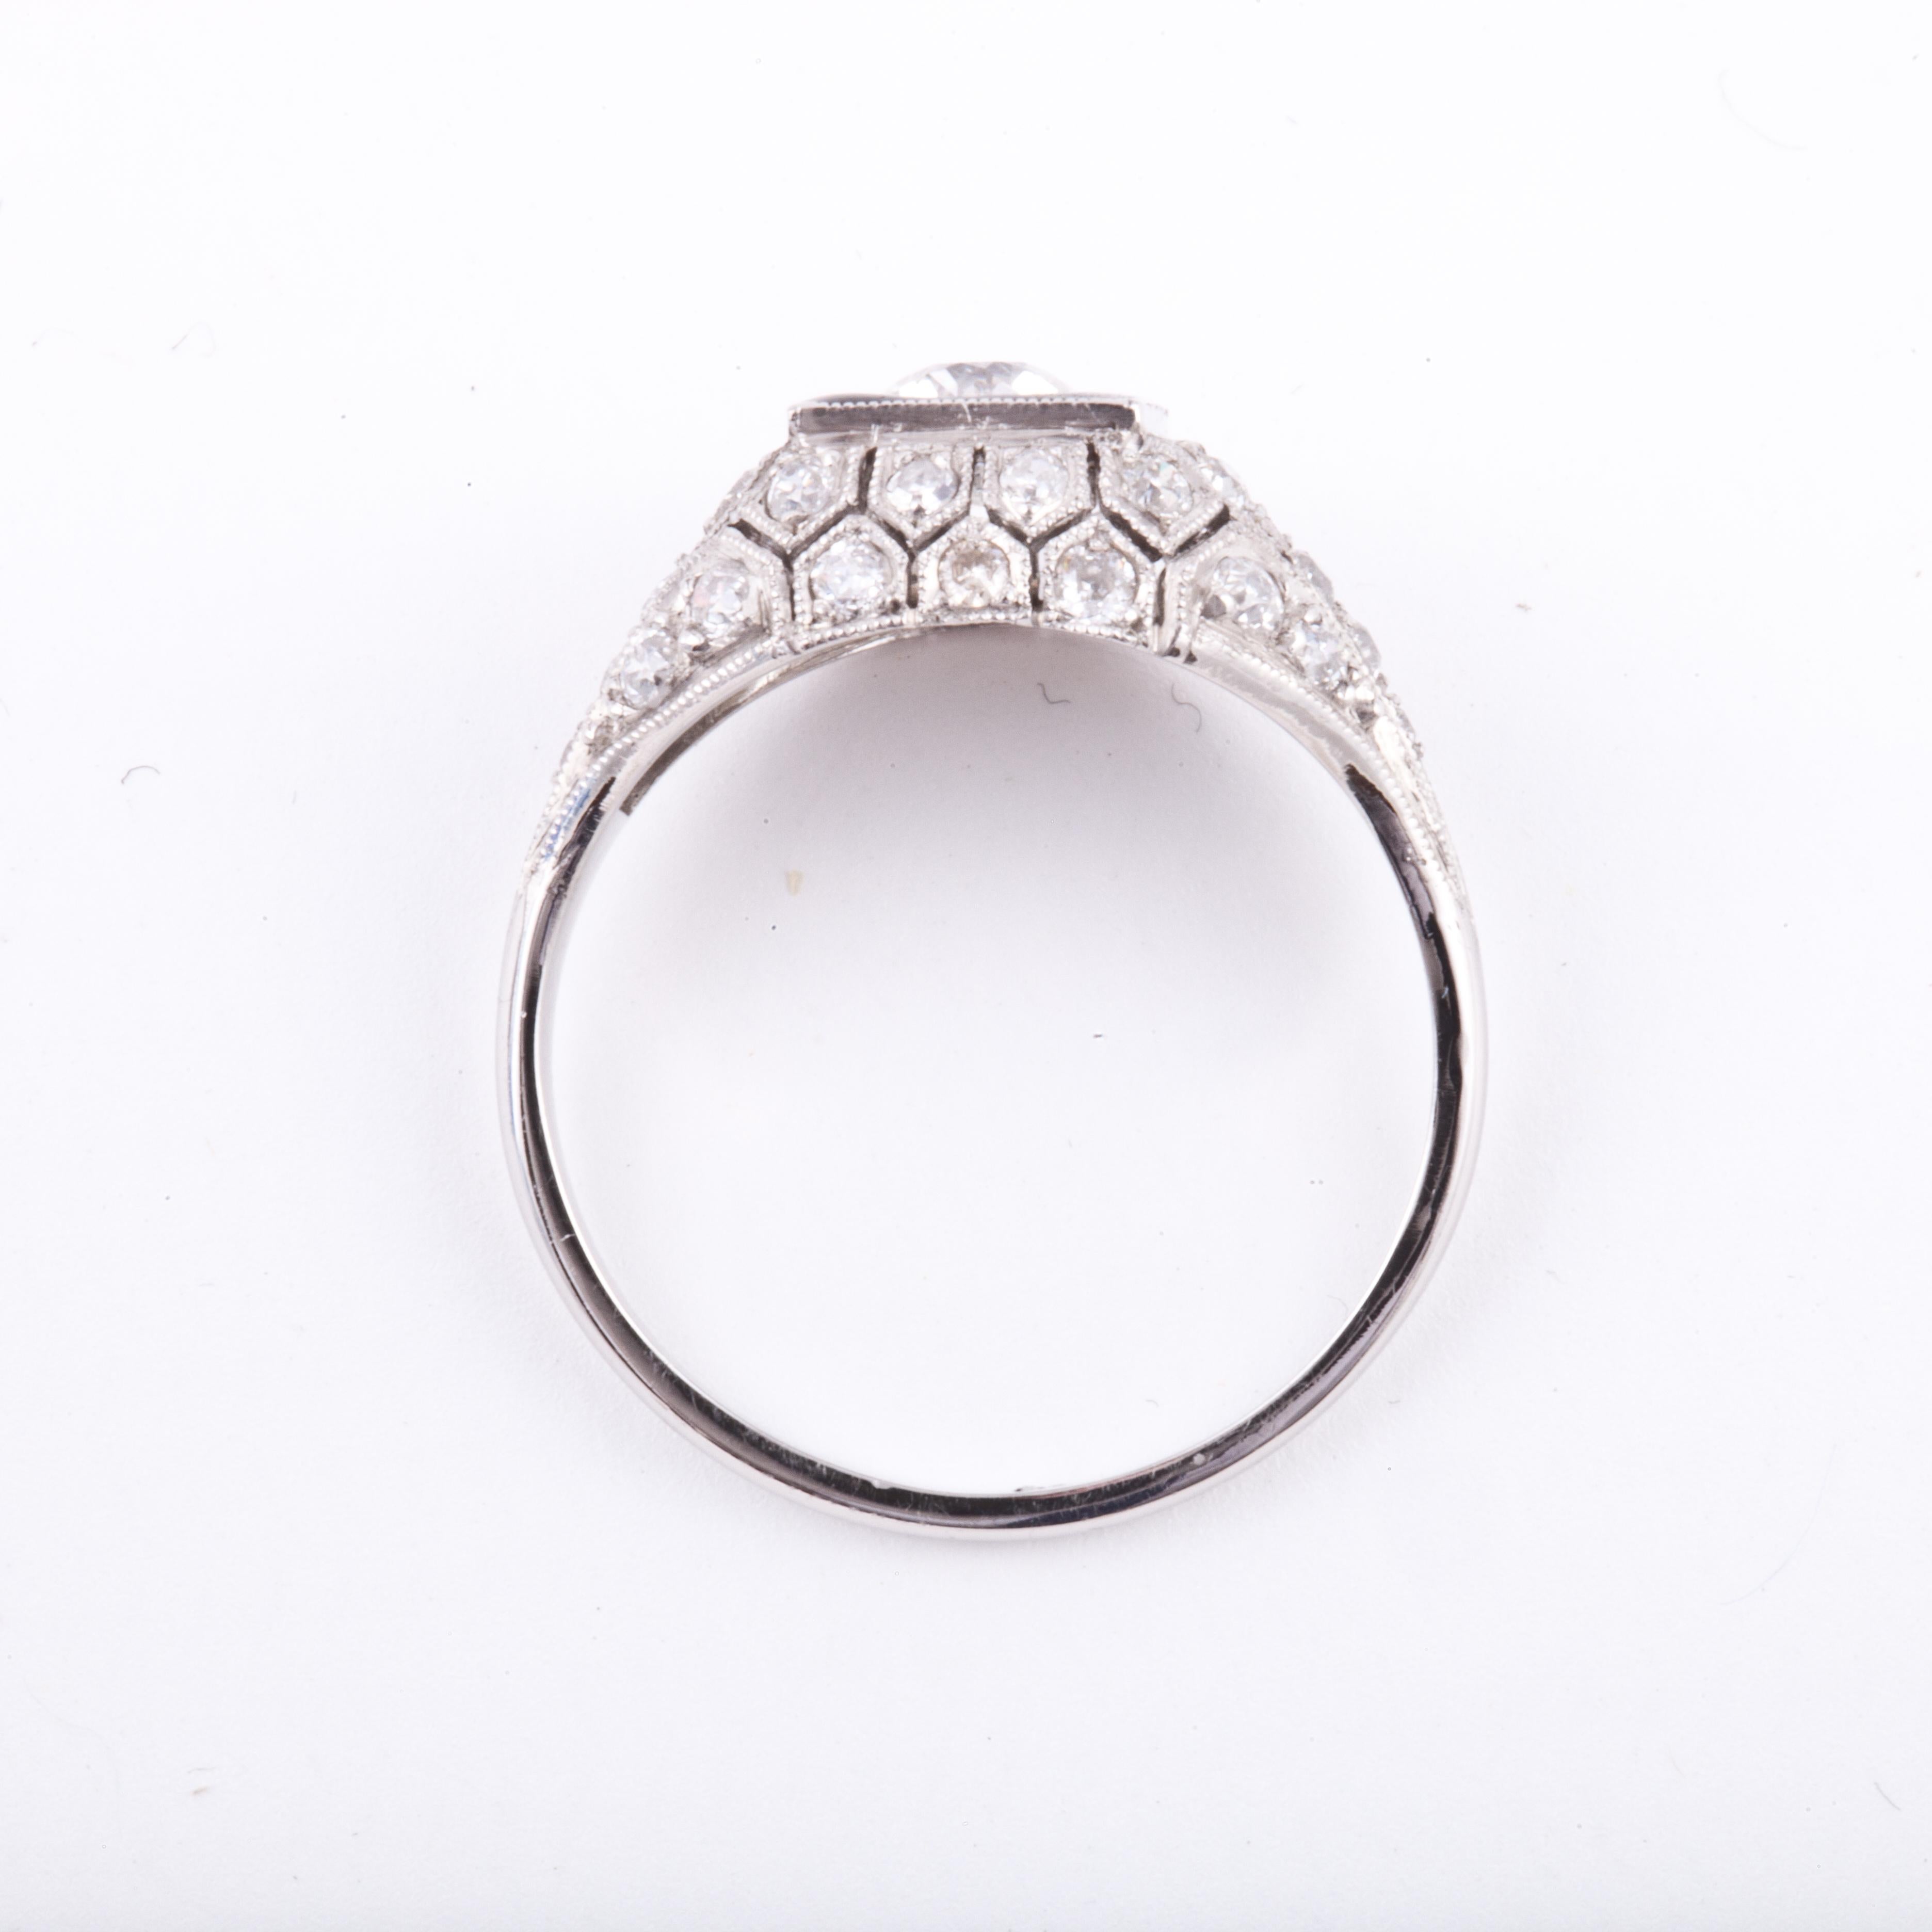 Platinum diamond ring featuring an Old European cut diamond ring framed by black enamel.  Center diamond weighs 0.42 carats; J color and SI1 clarity.  There are also 32 round diamonds with a total carat weight of 0.65 carats; H color and VS clarity.